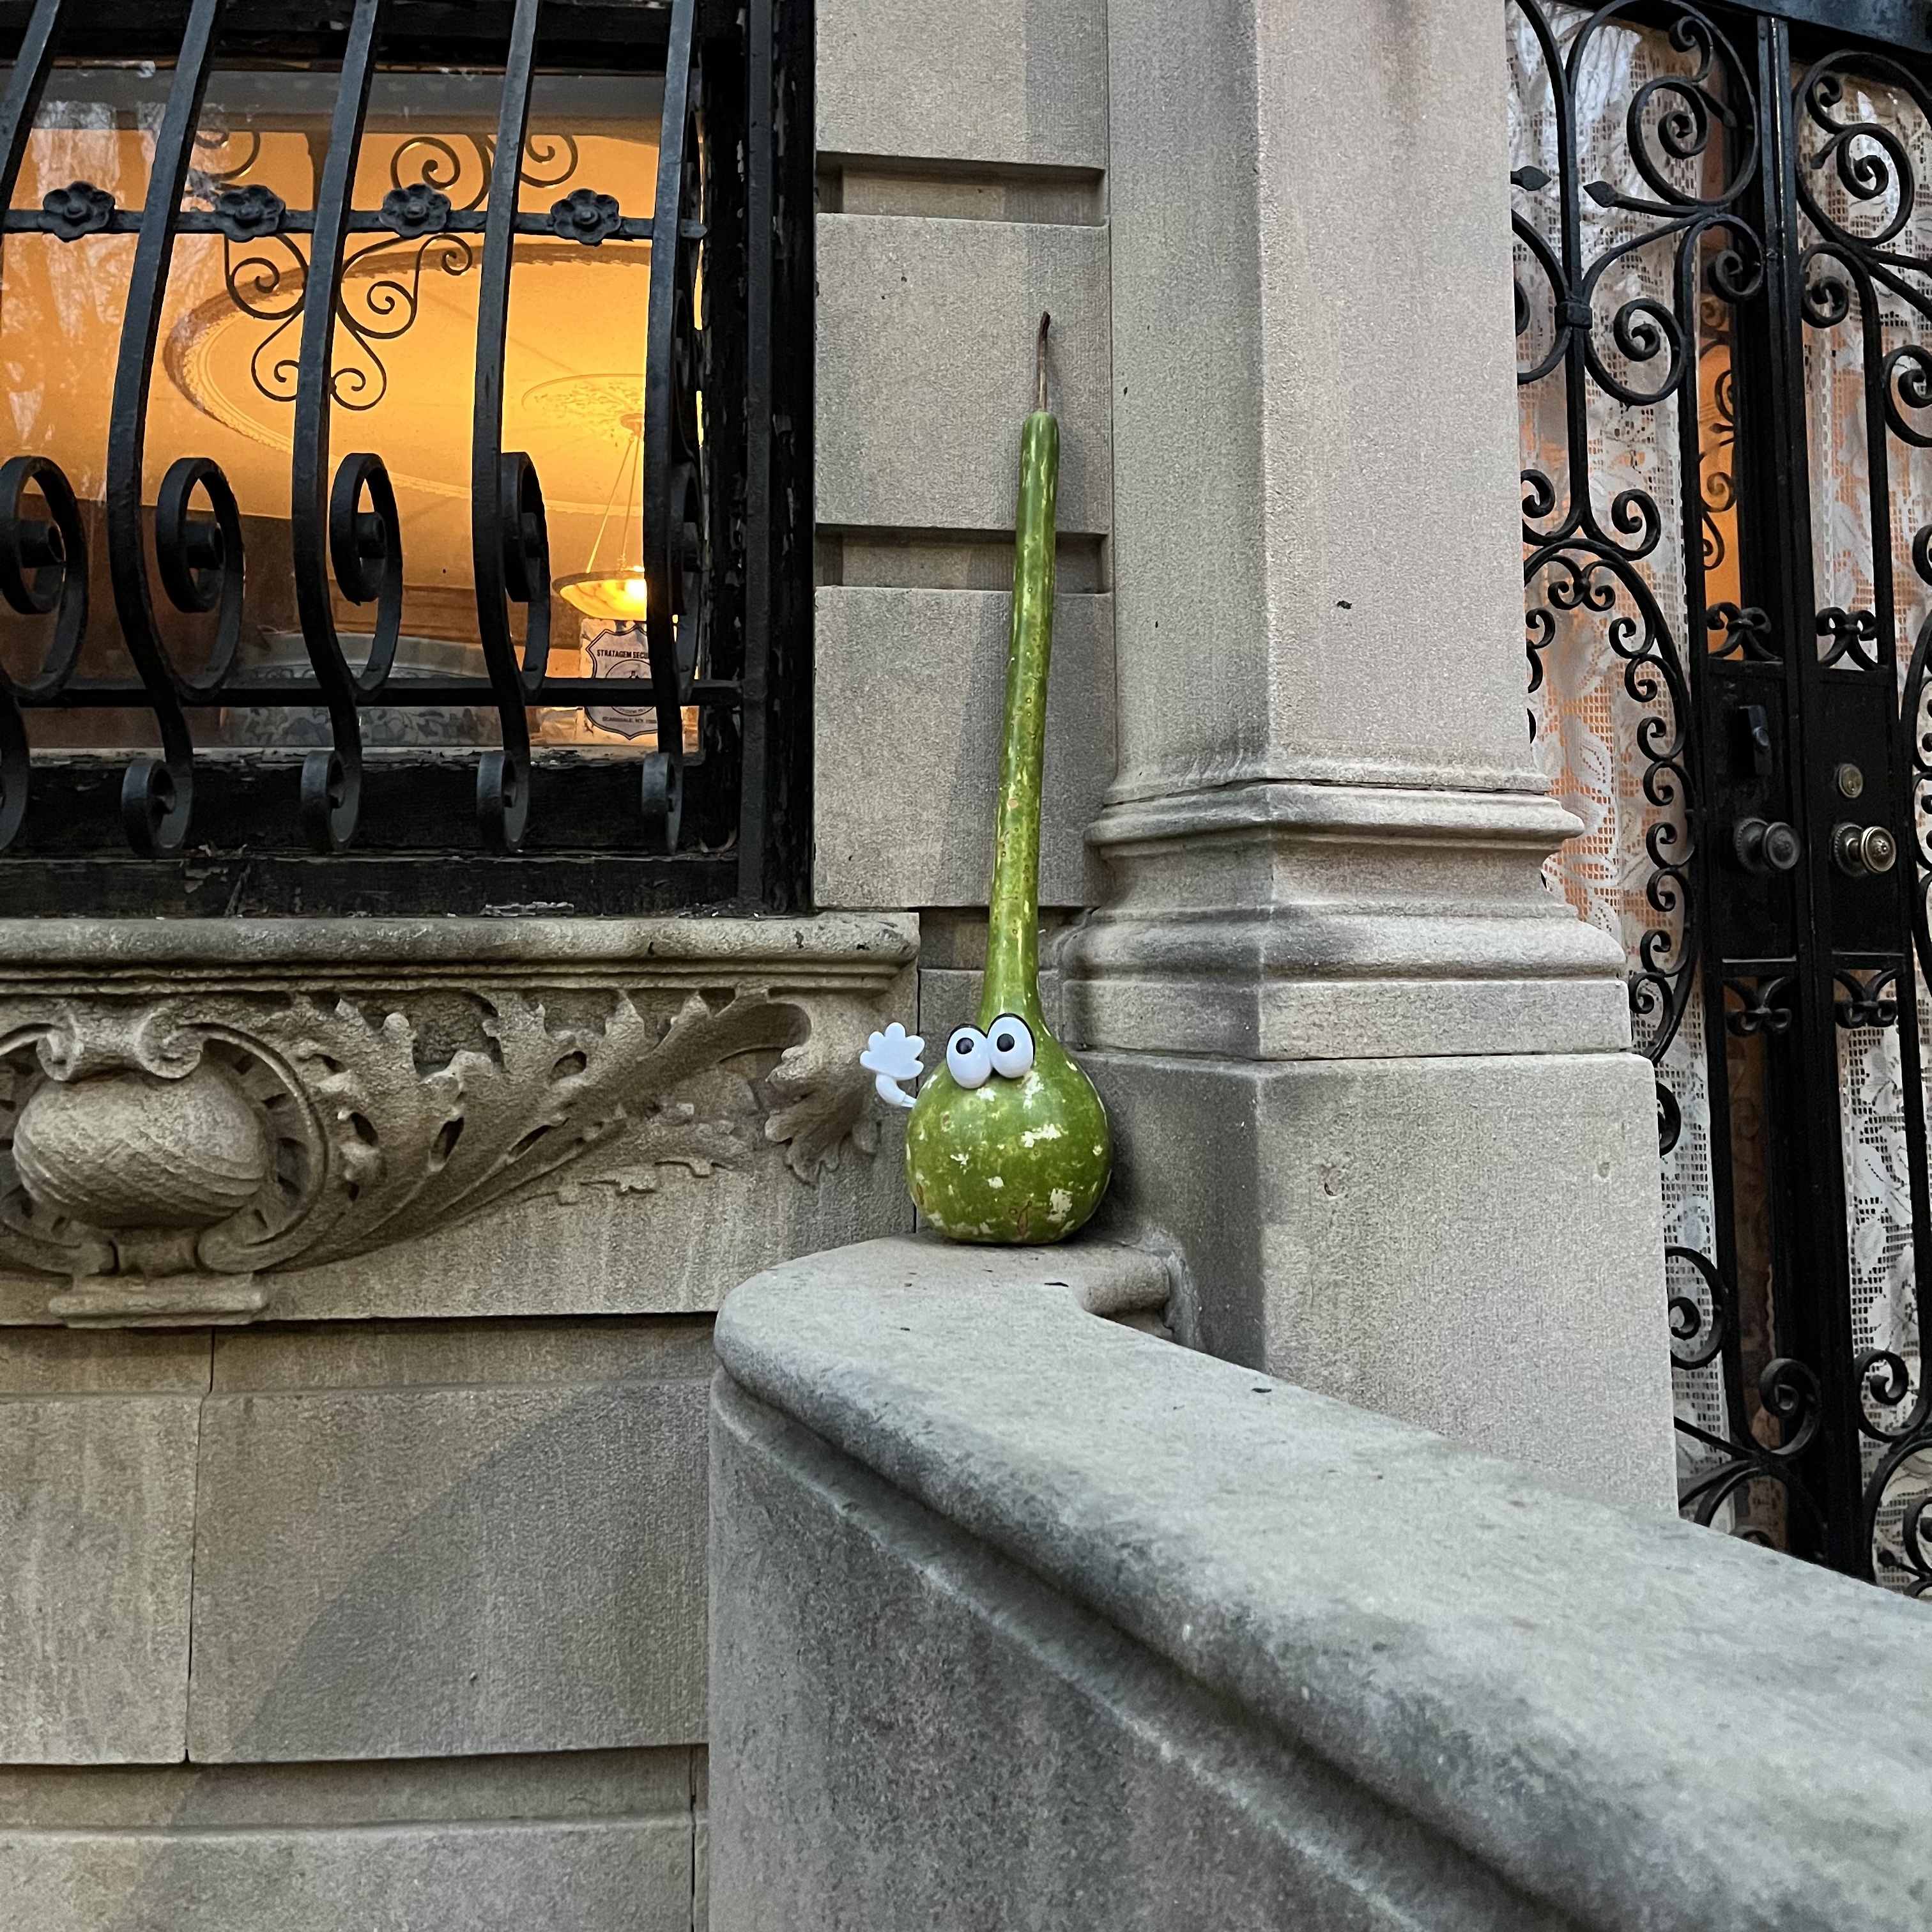 A smiling, decorative gourd. 108 8th Avenue, Park Slope, Brooklyn.